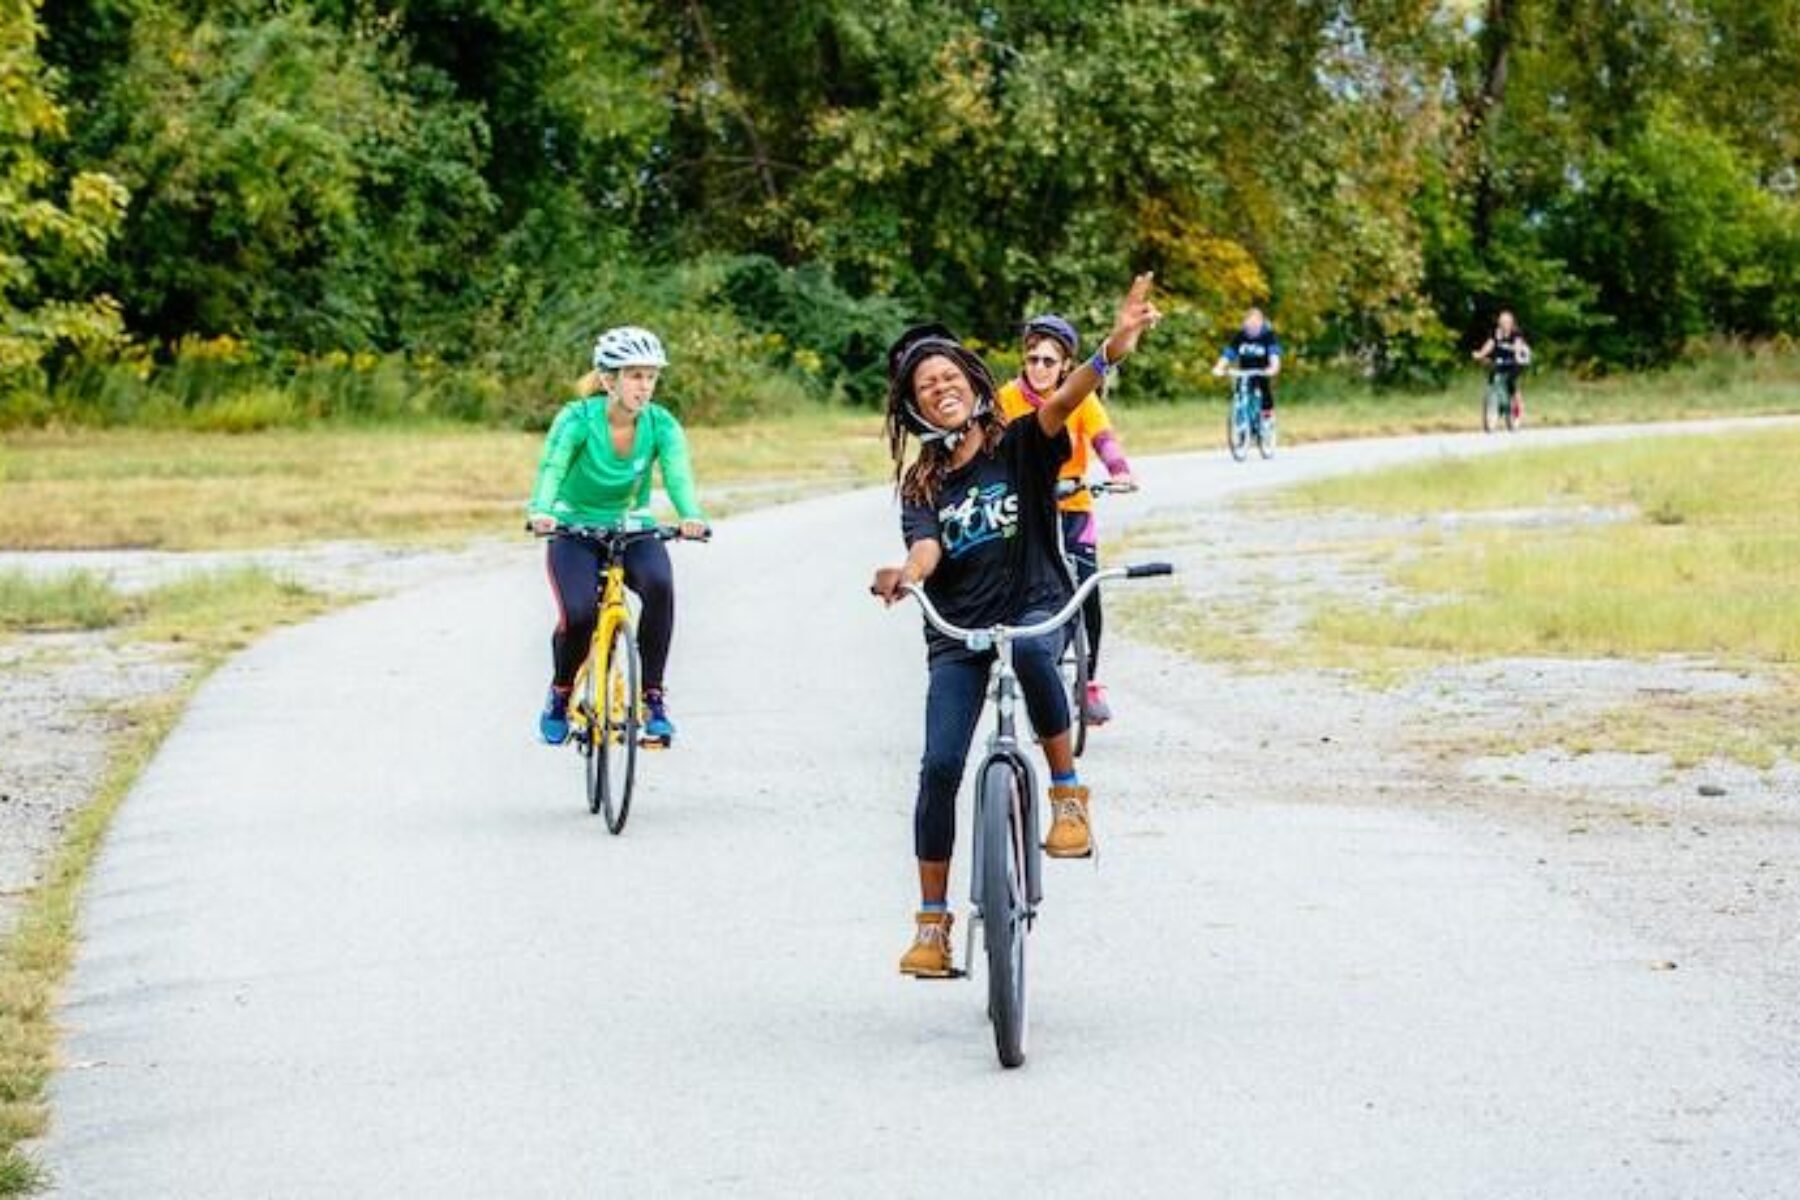 Along the Great Rivers Greenway trail network in St. Louis, Missouri | Photo courtesy Great Rivers Greenway